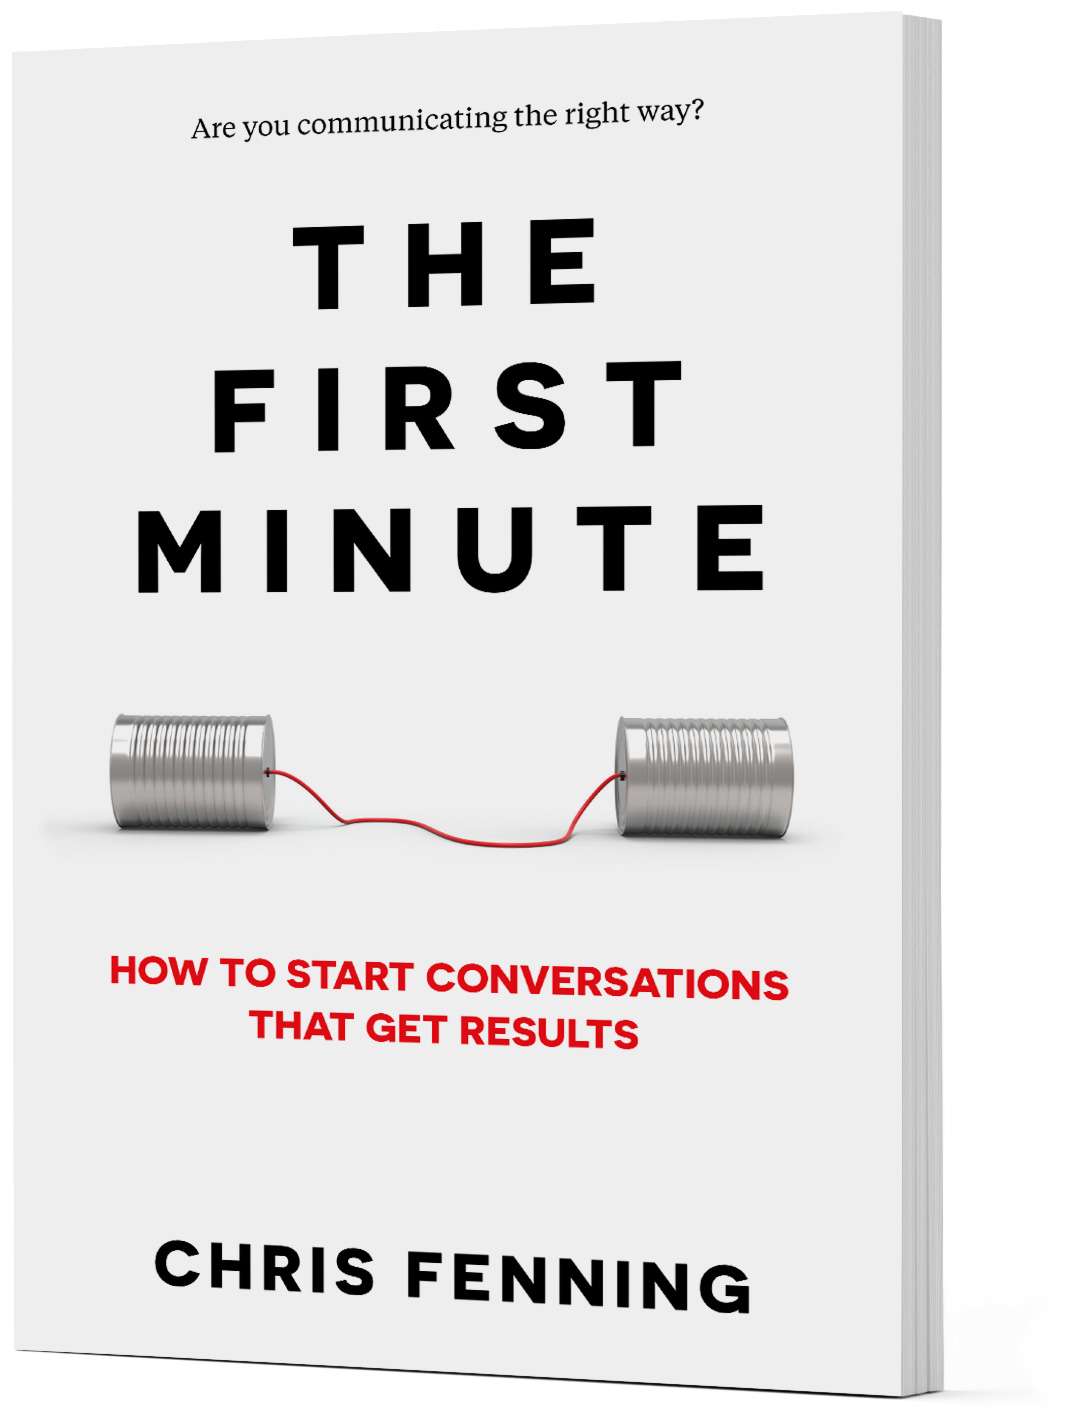 The First Minute book by Chris Fenning